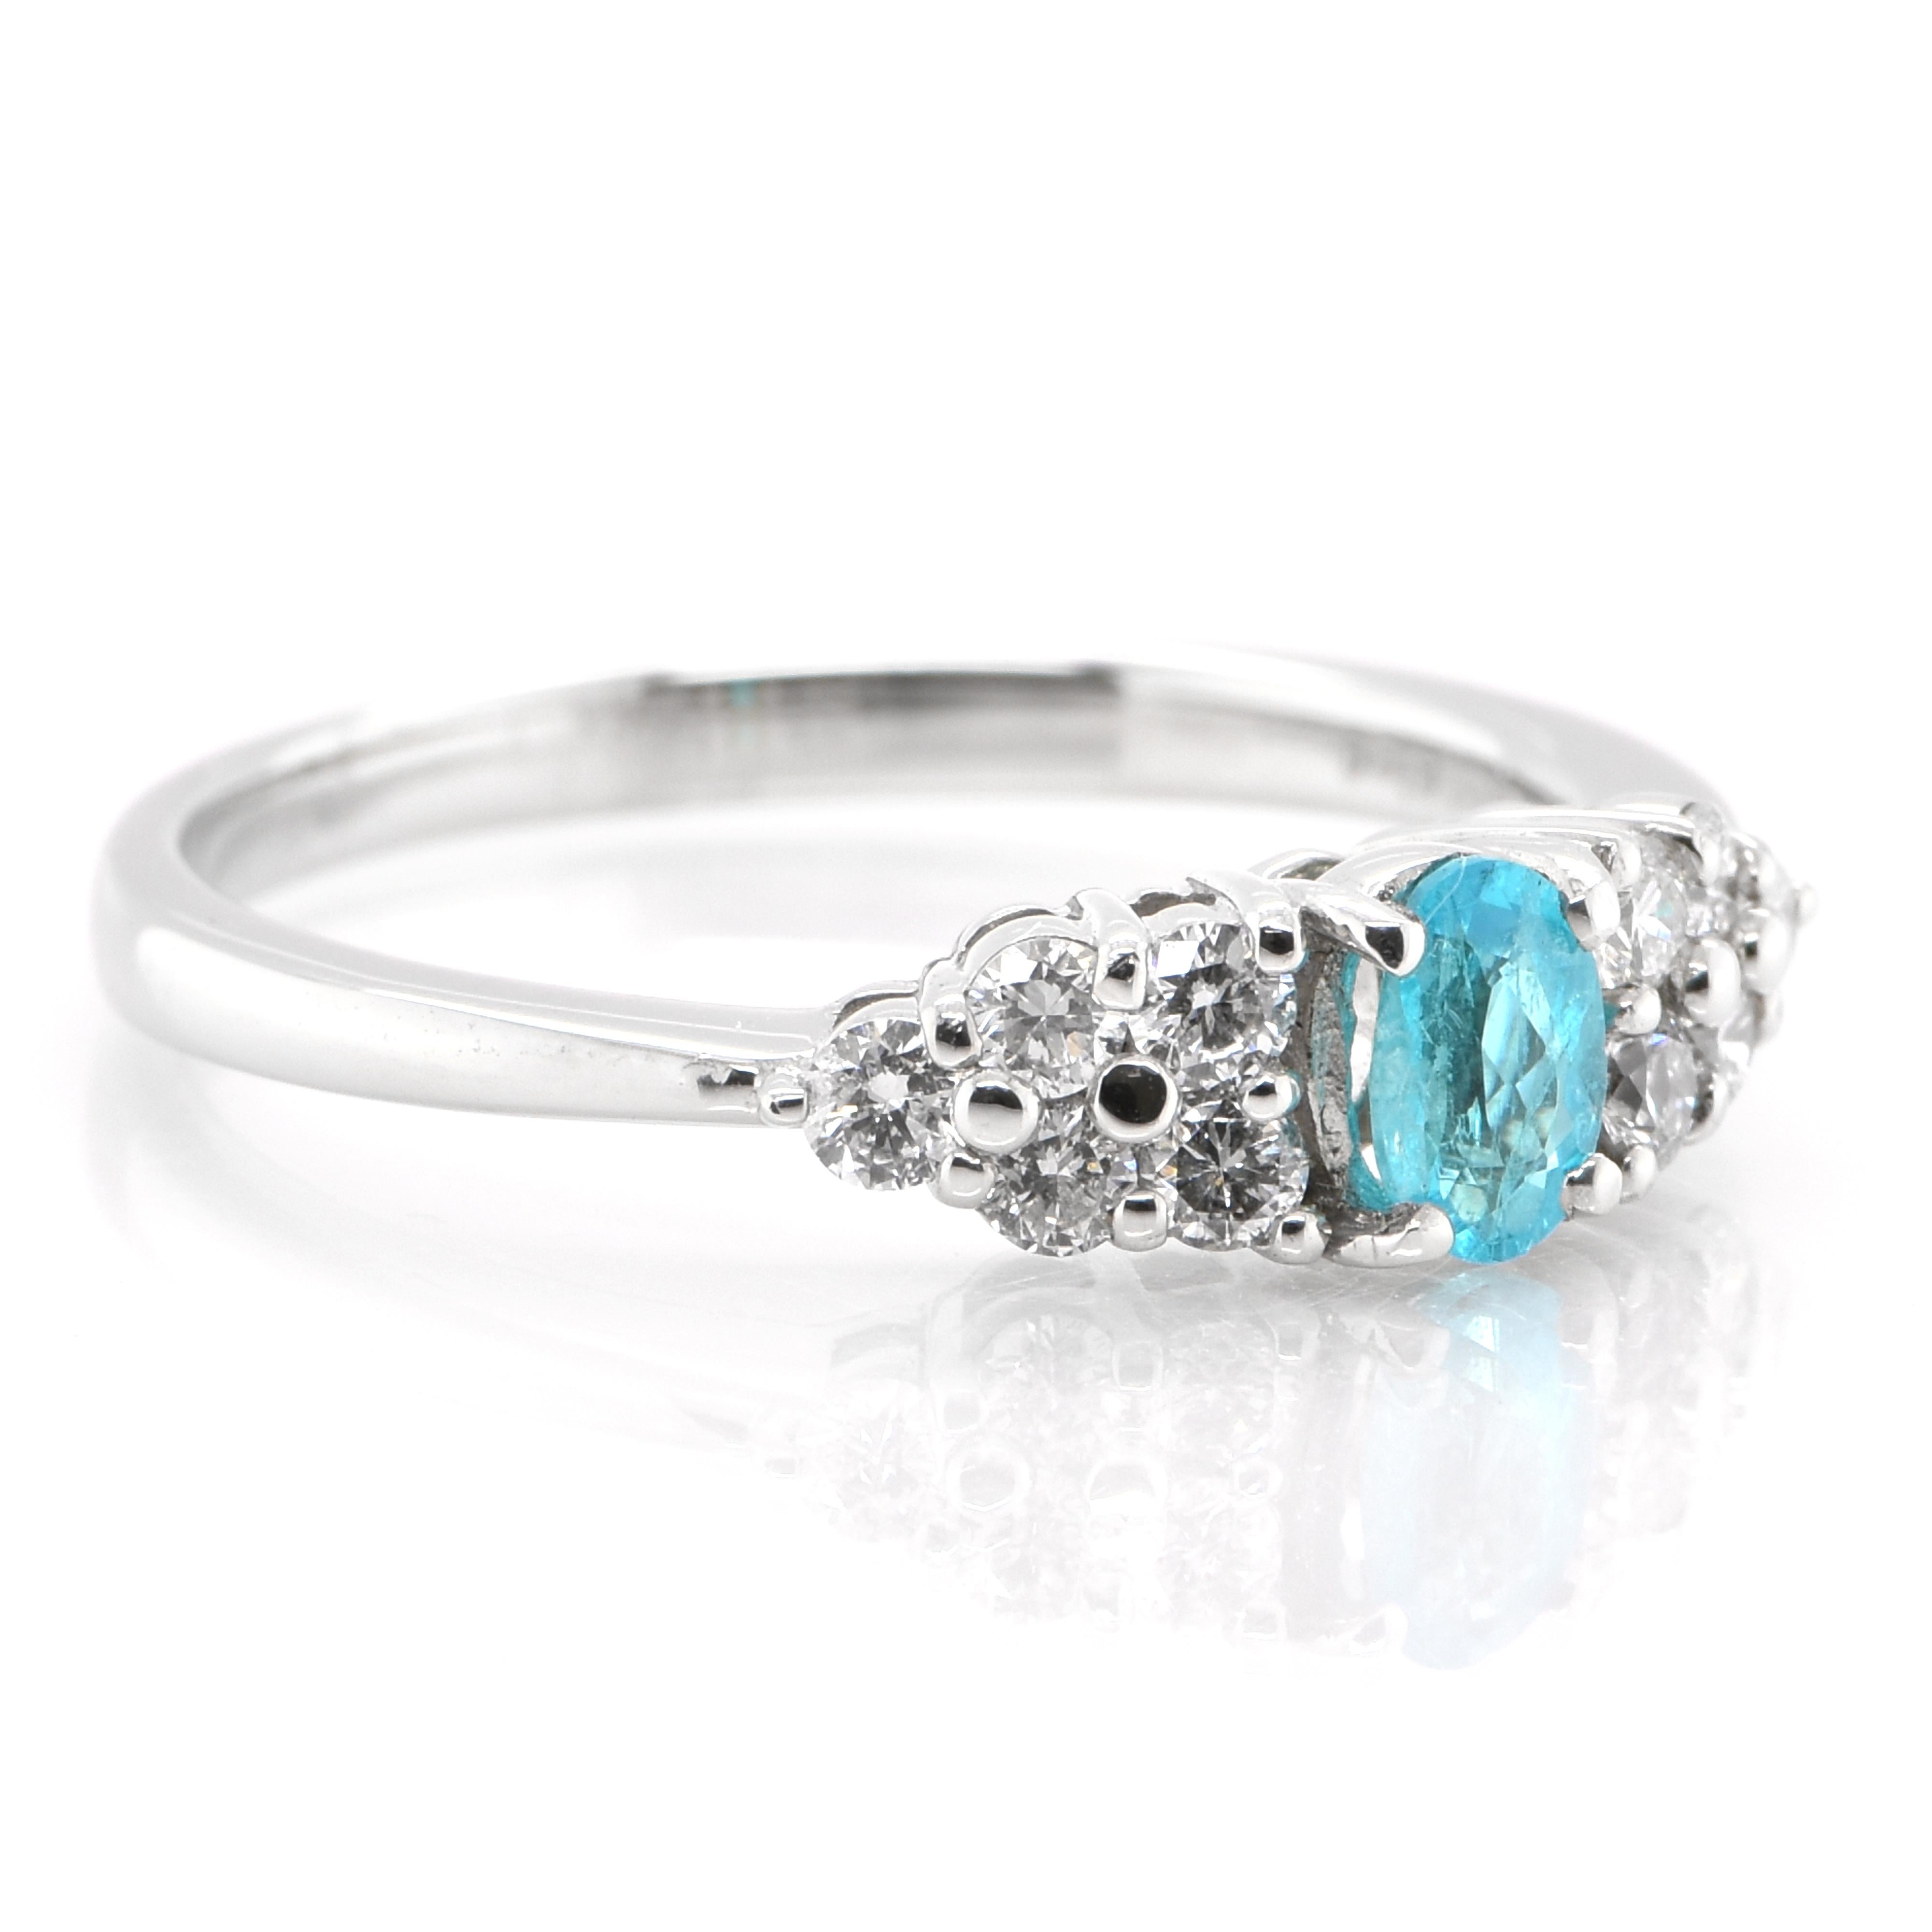 An elegant engagement ring showcasing a 0.26 Carat oval-shaped, natural Brazilian Paraiba Tourmaline and 0.31 carat of Diamond Accents set in Platinum. The center Paraiba Tourmaline comes with a GIA report confirming its Brazilian origin. The center